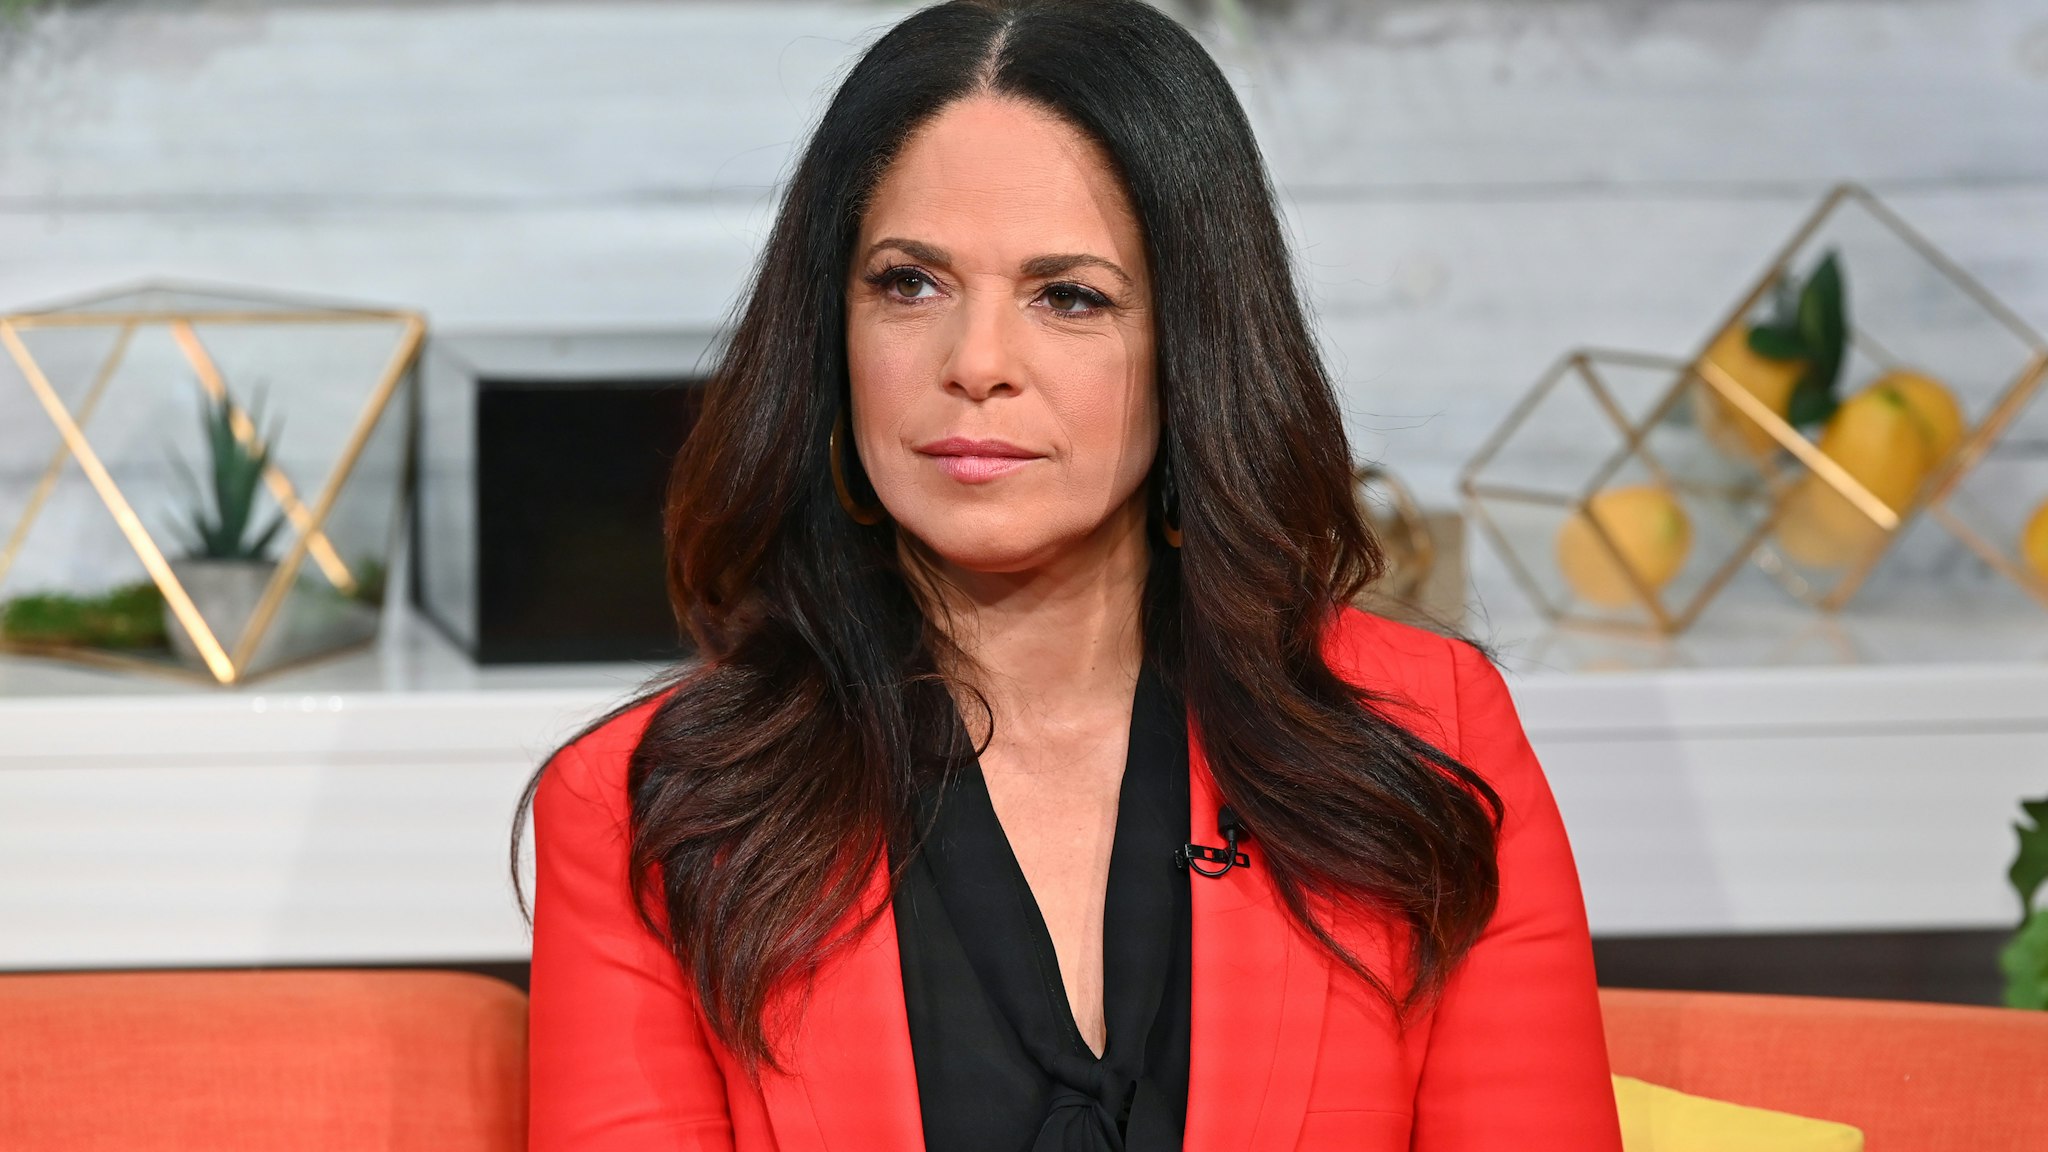 Broadcast journalist Soledad O'Brien visits BuzzFeed's "AM To DM" on November 08, 2019 in New York City.